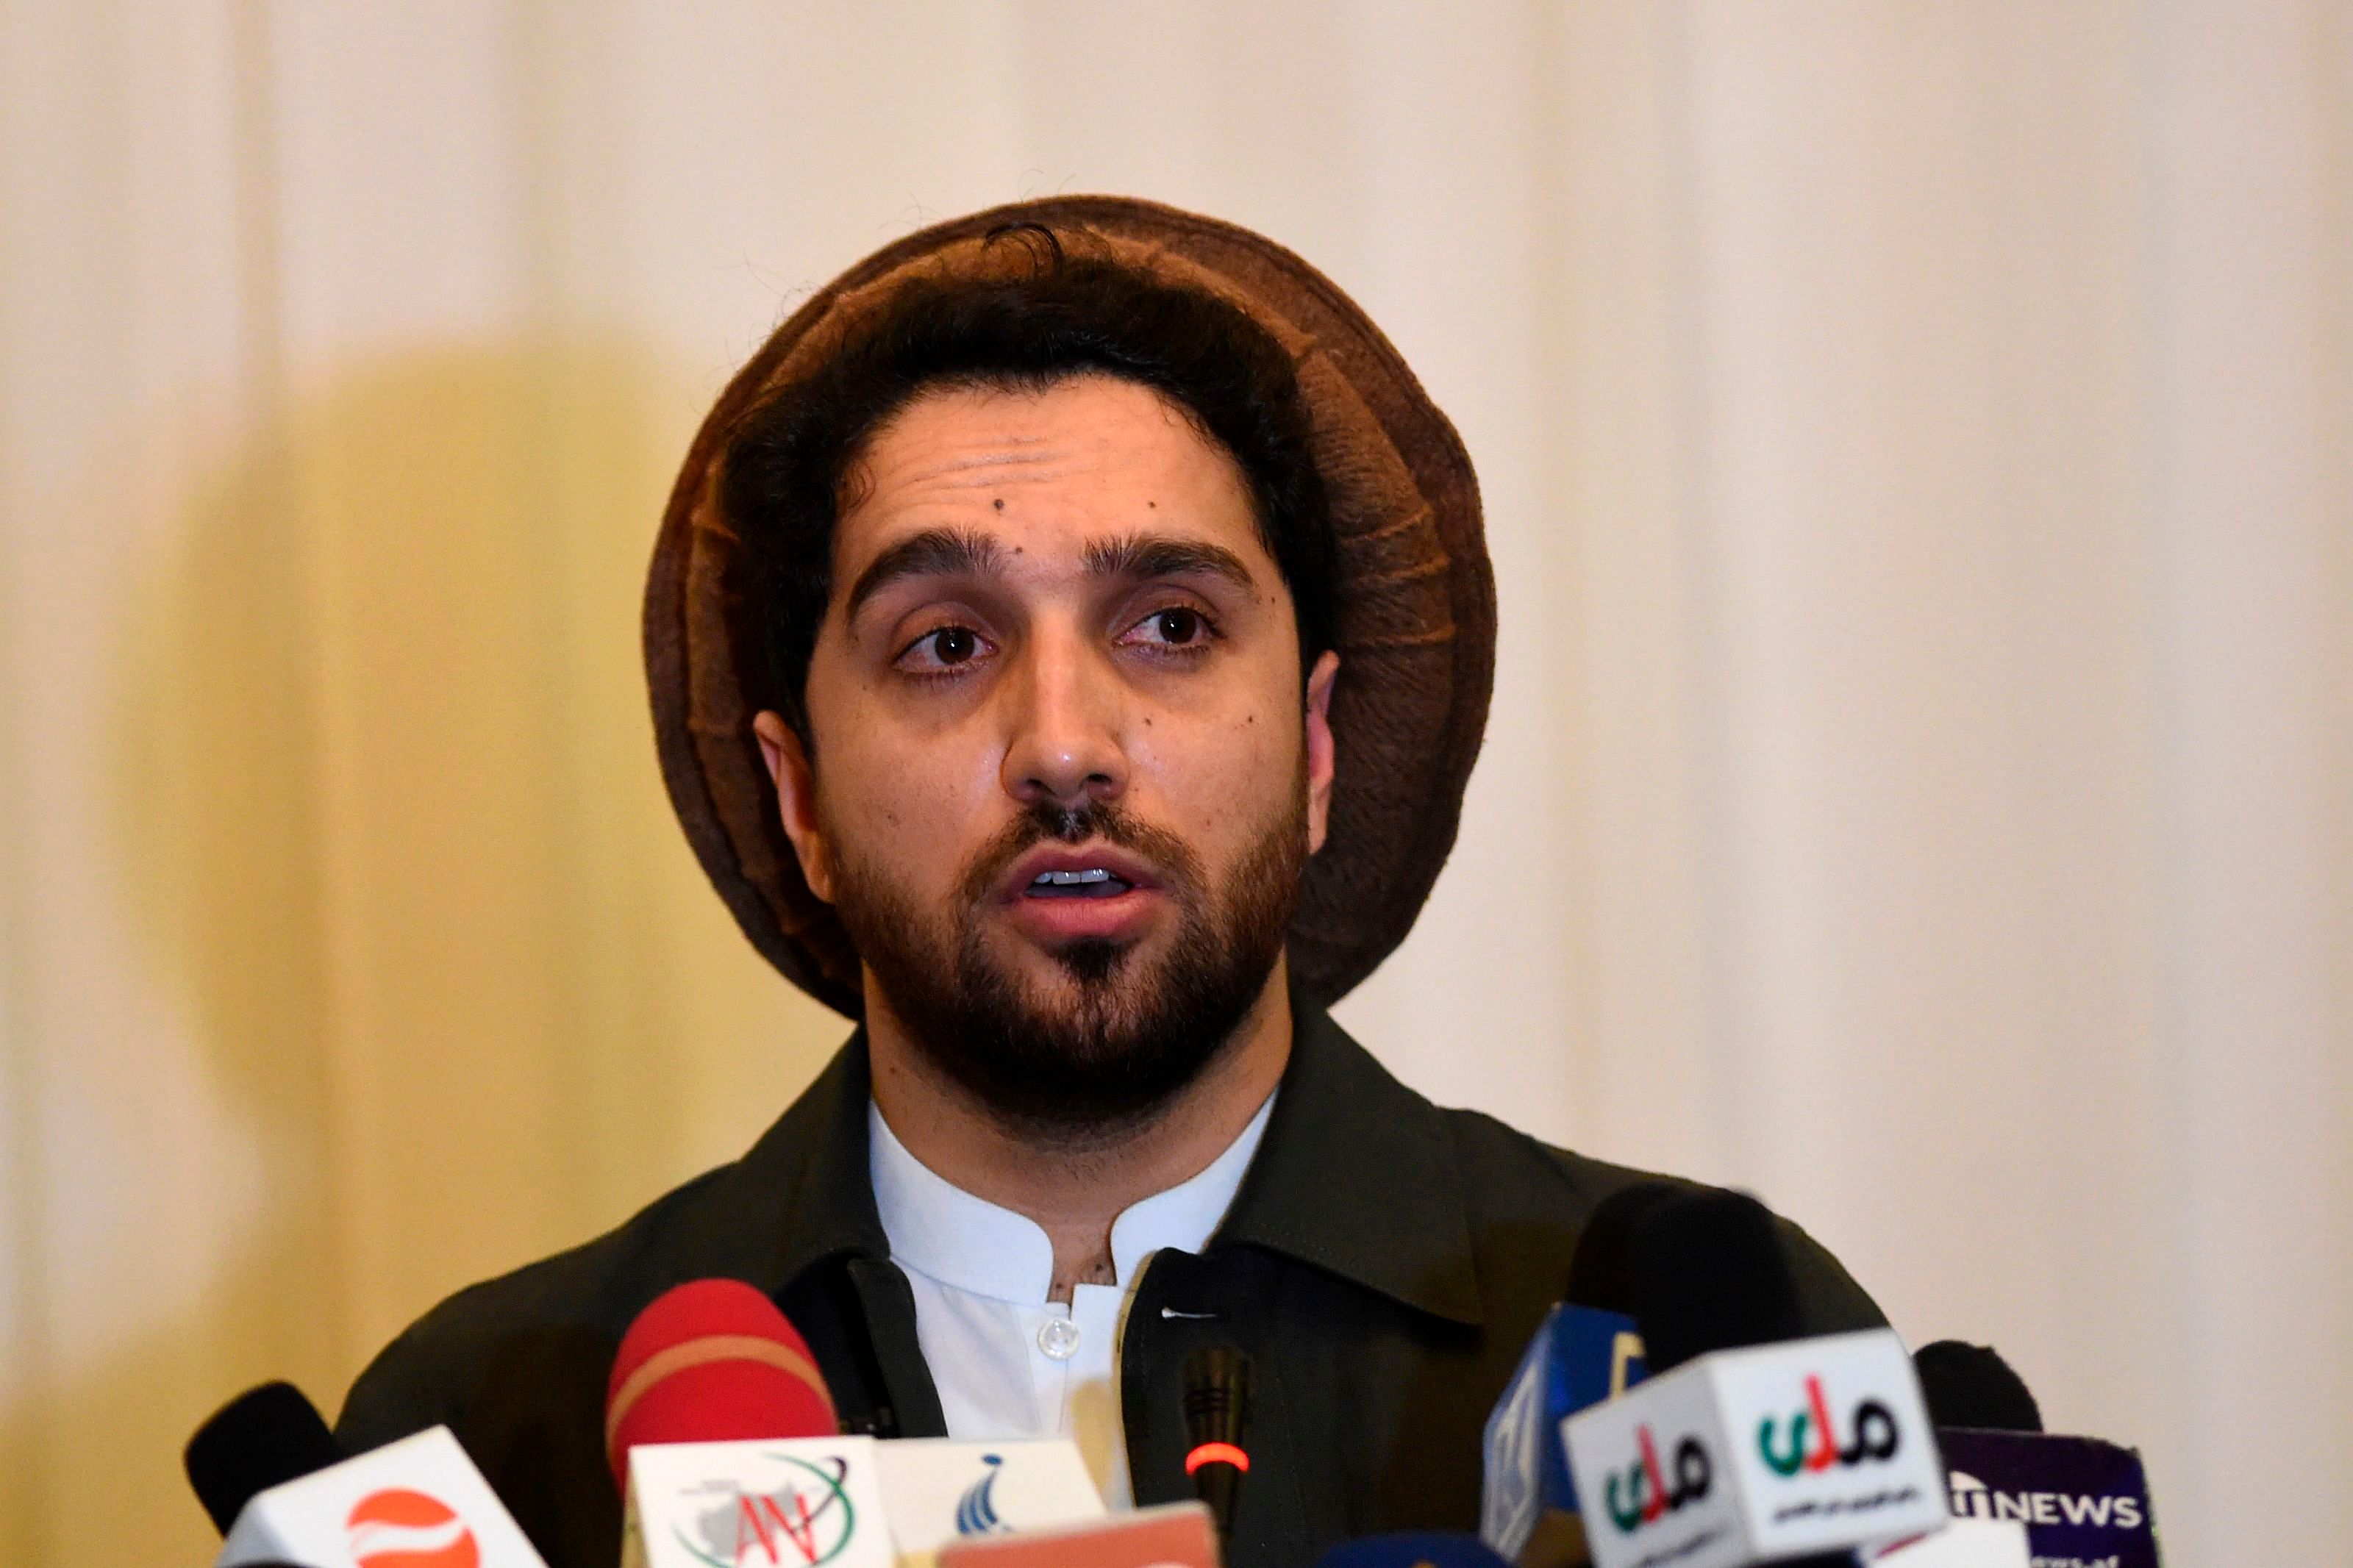 Ahmad Massoud, the son of the largely revered late military and political Afghan leader Ahmad Shah Massoud also known as "The Lion of Panjshir", speaks during a press conference at the Intercontinental Hotel in Kabul. (AFP Photo)